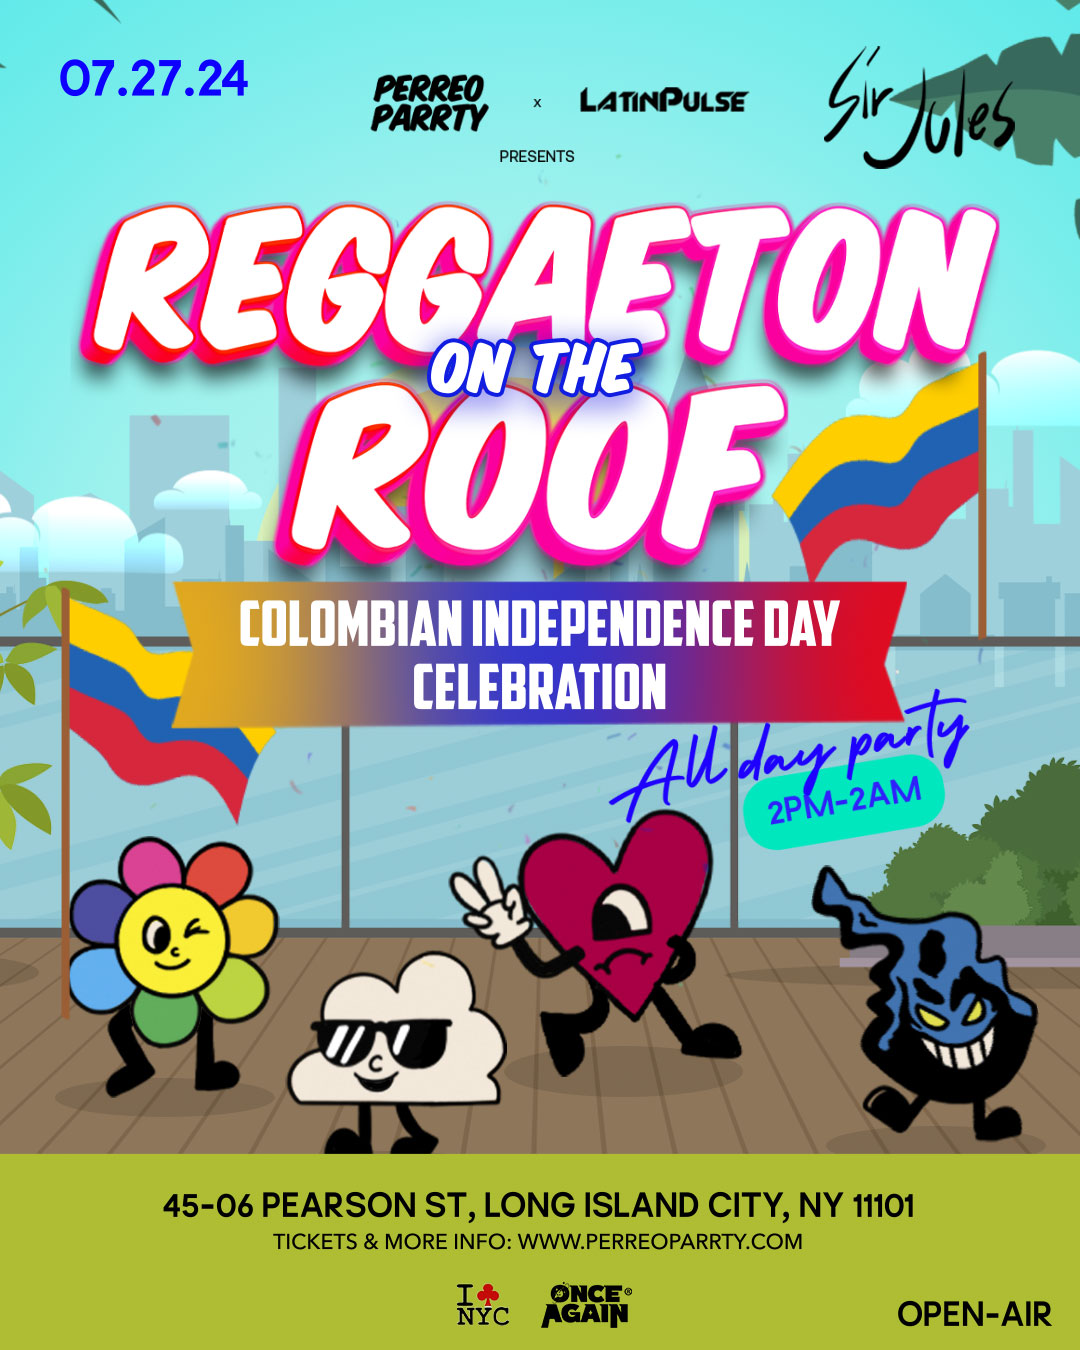 Reggaeton on the ROOF - Colombian Sunset Latin Party at Sir Jules NYC